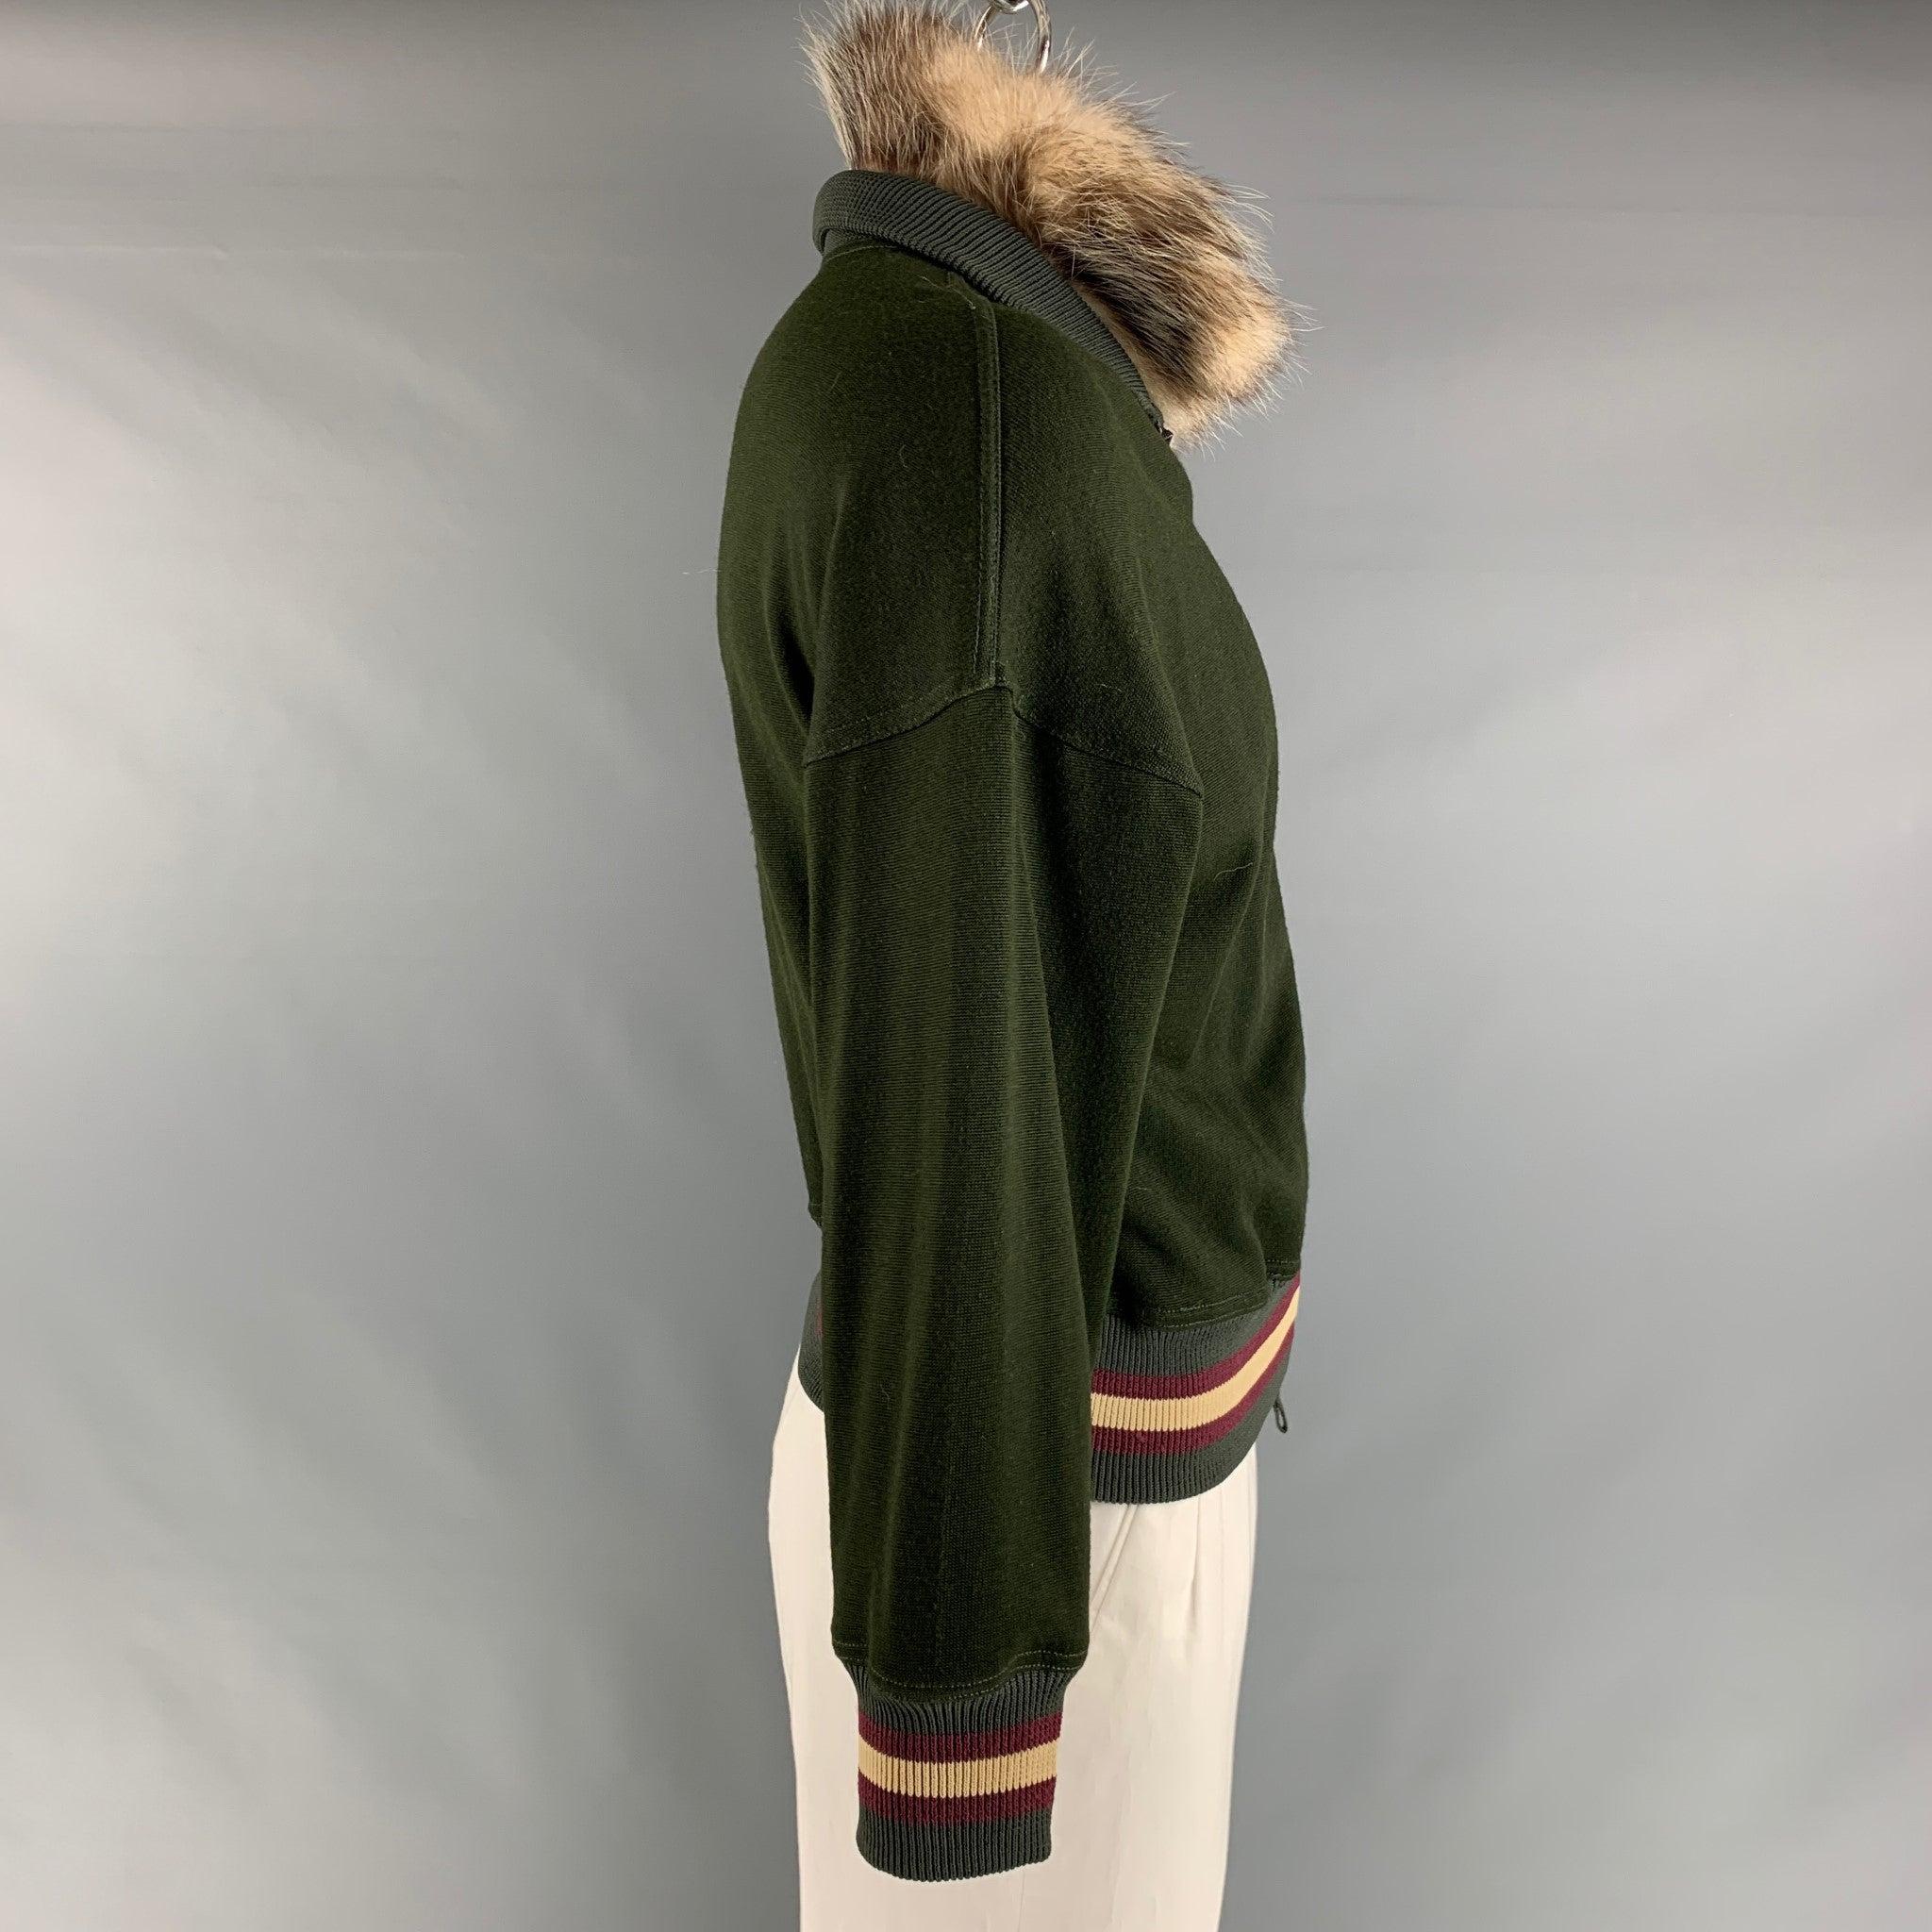 JEAN PAUL GAULTIER jacket comes in a olive viscose and cotton jersey knit material featuring a ribbed hem, drop shoulder, detachable fur collar, high neck, and a full zip up closure. Made in Italy. Very Good Pre-Owned Condition. Minor signs of wear.